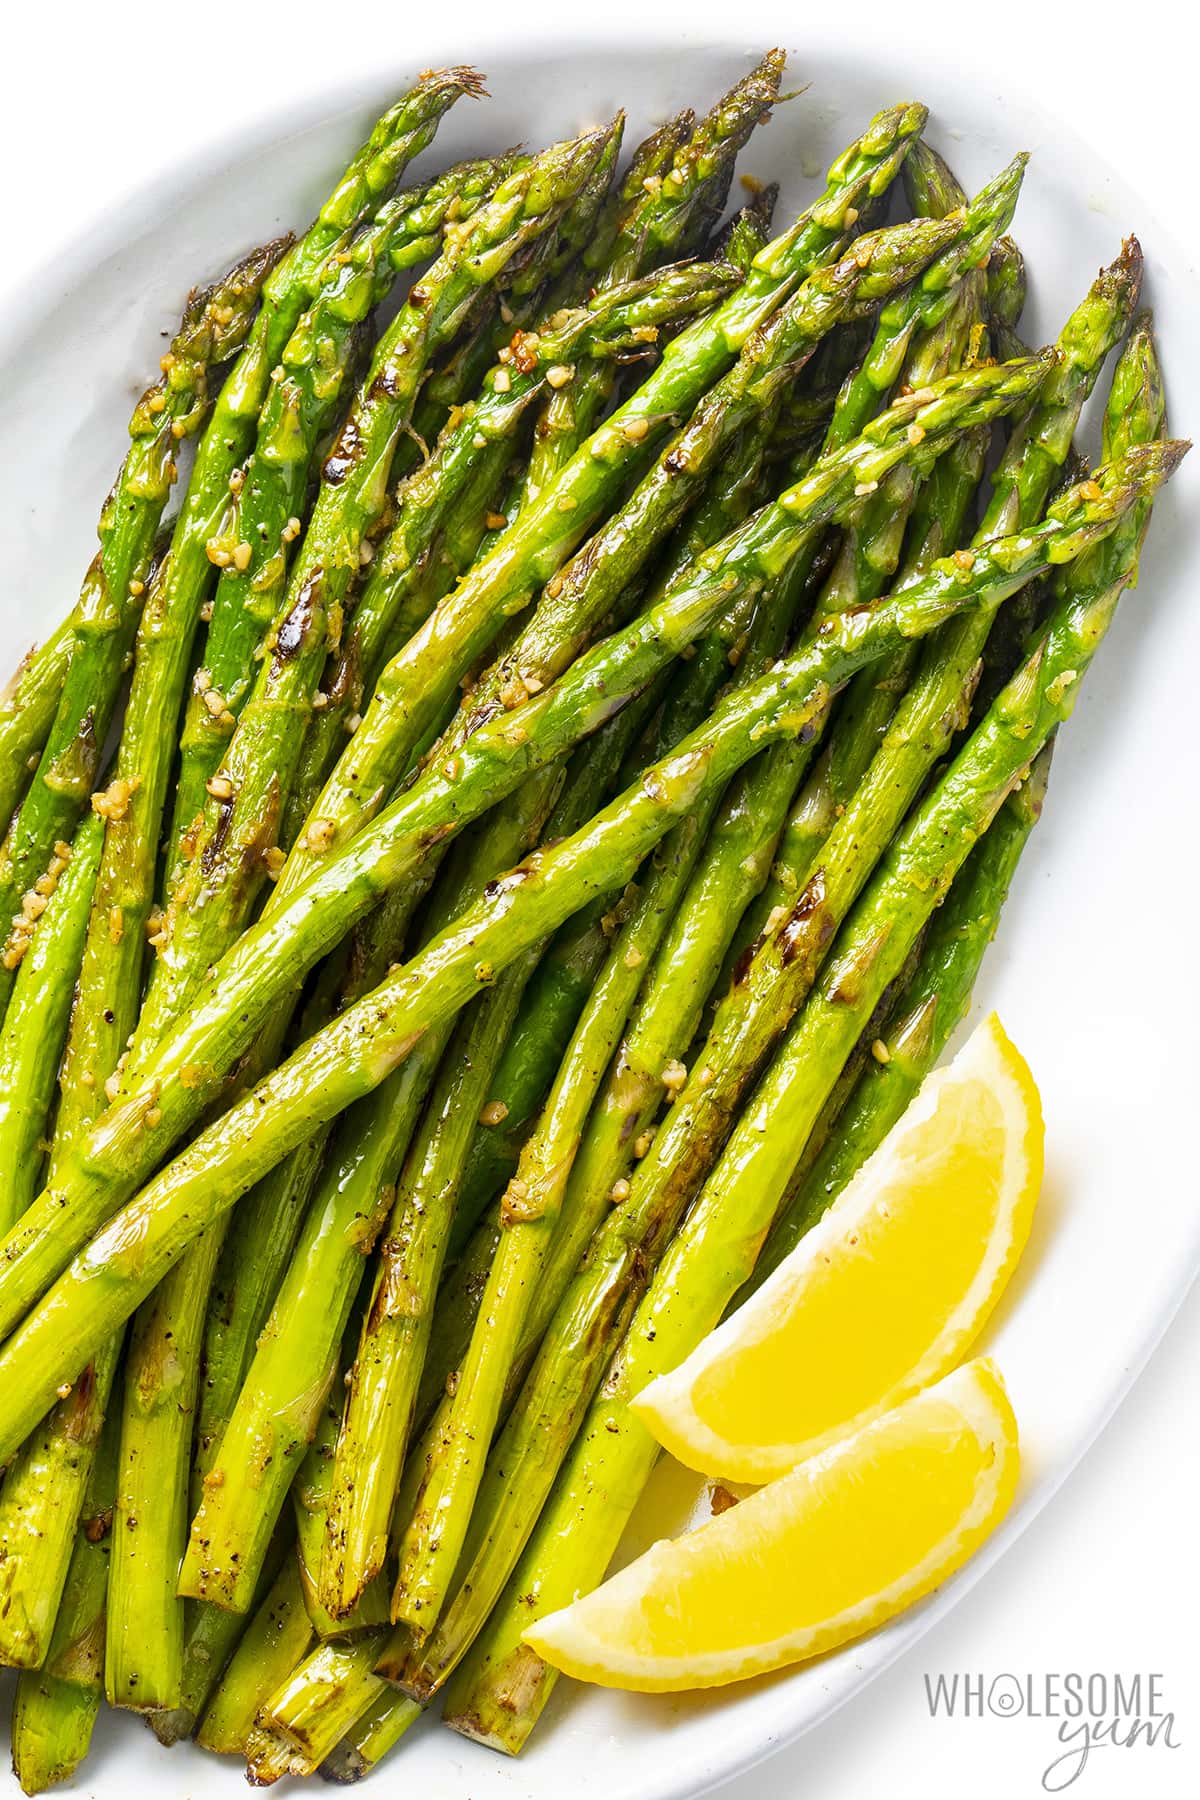 Sauteed asparagus on a plate with lemon wedges.